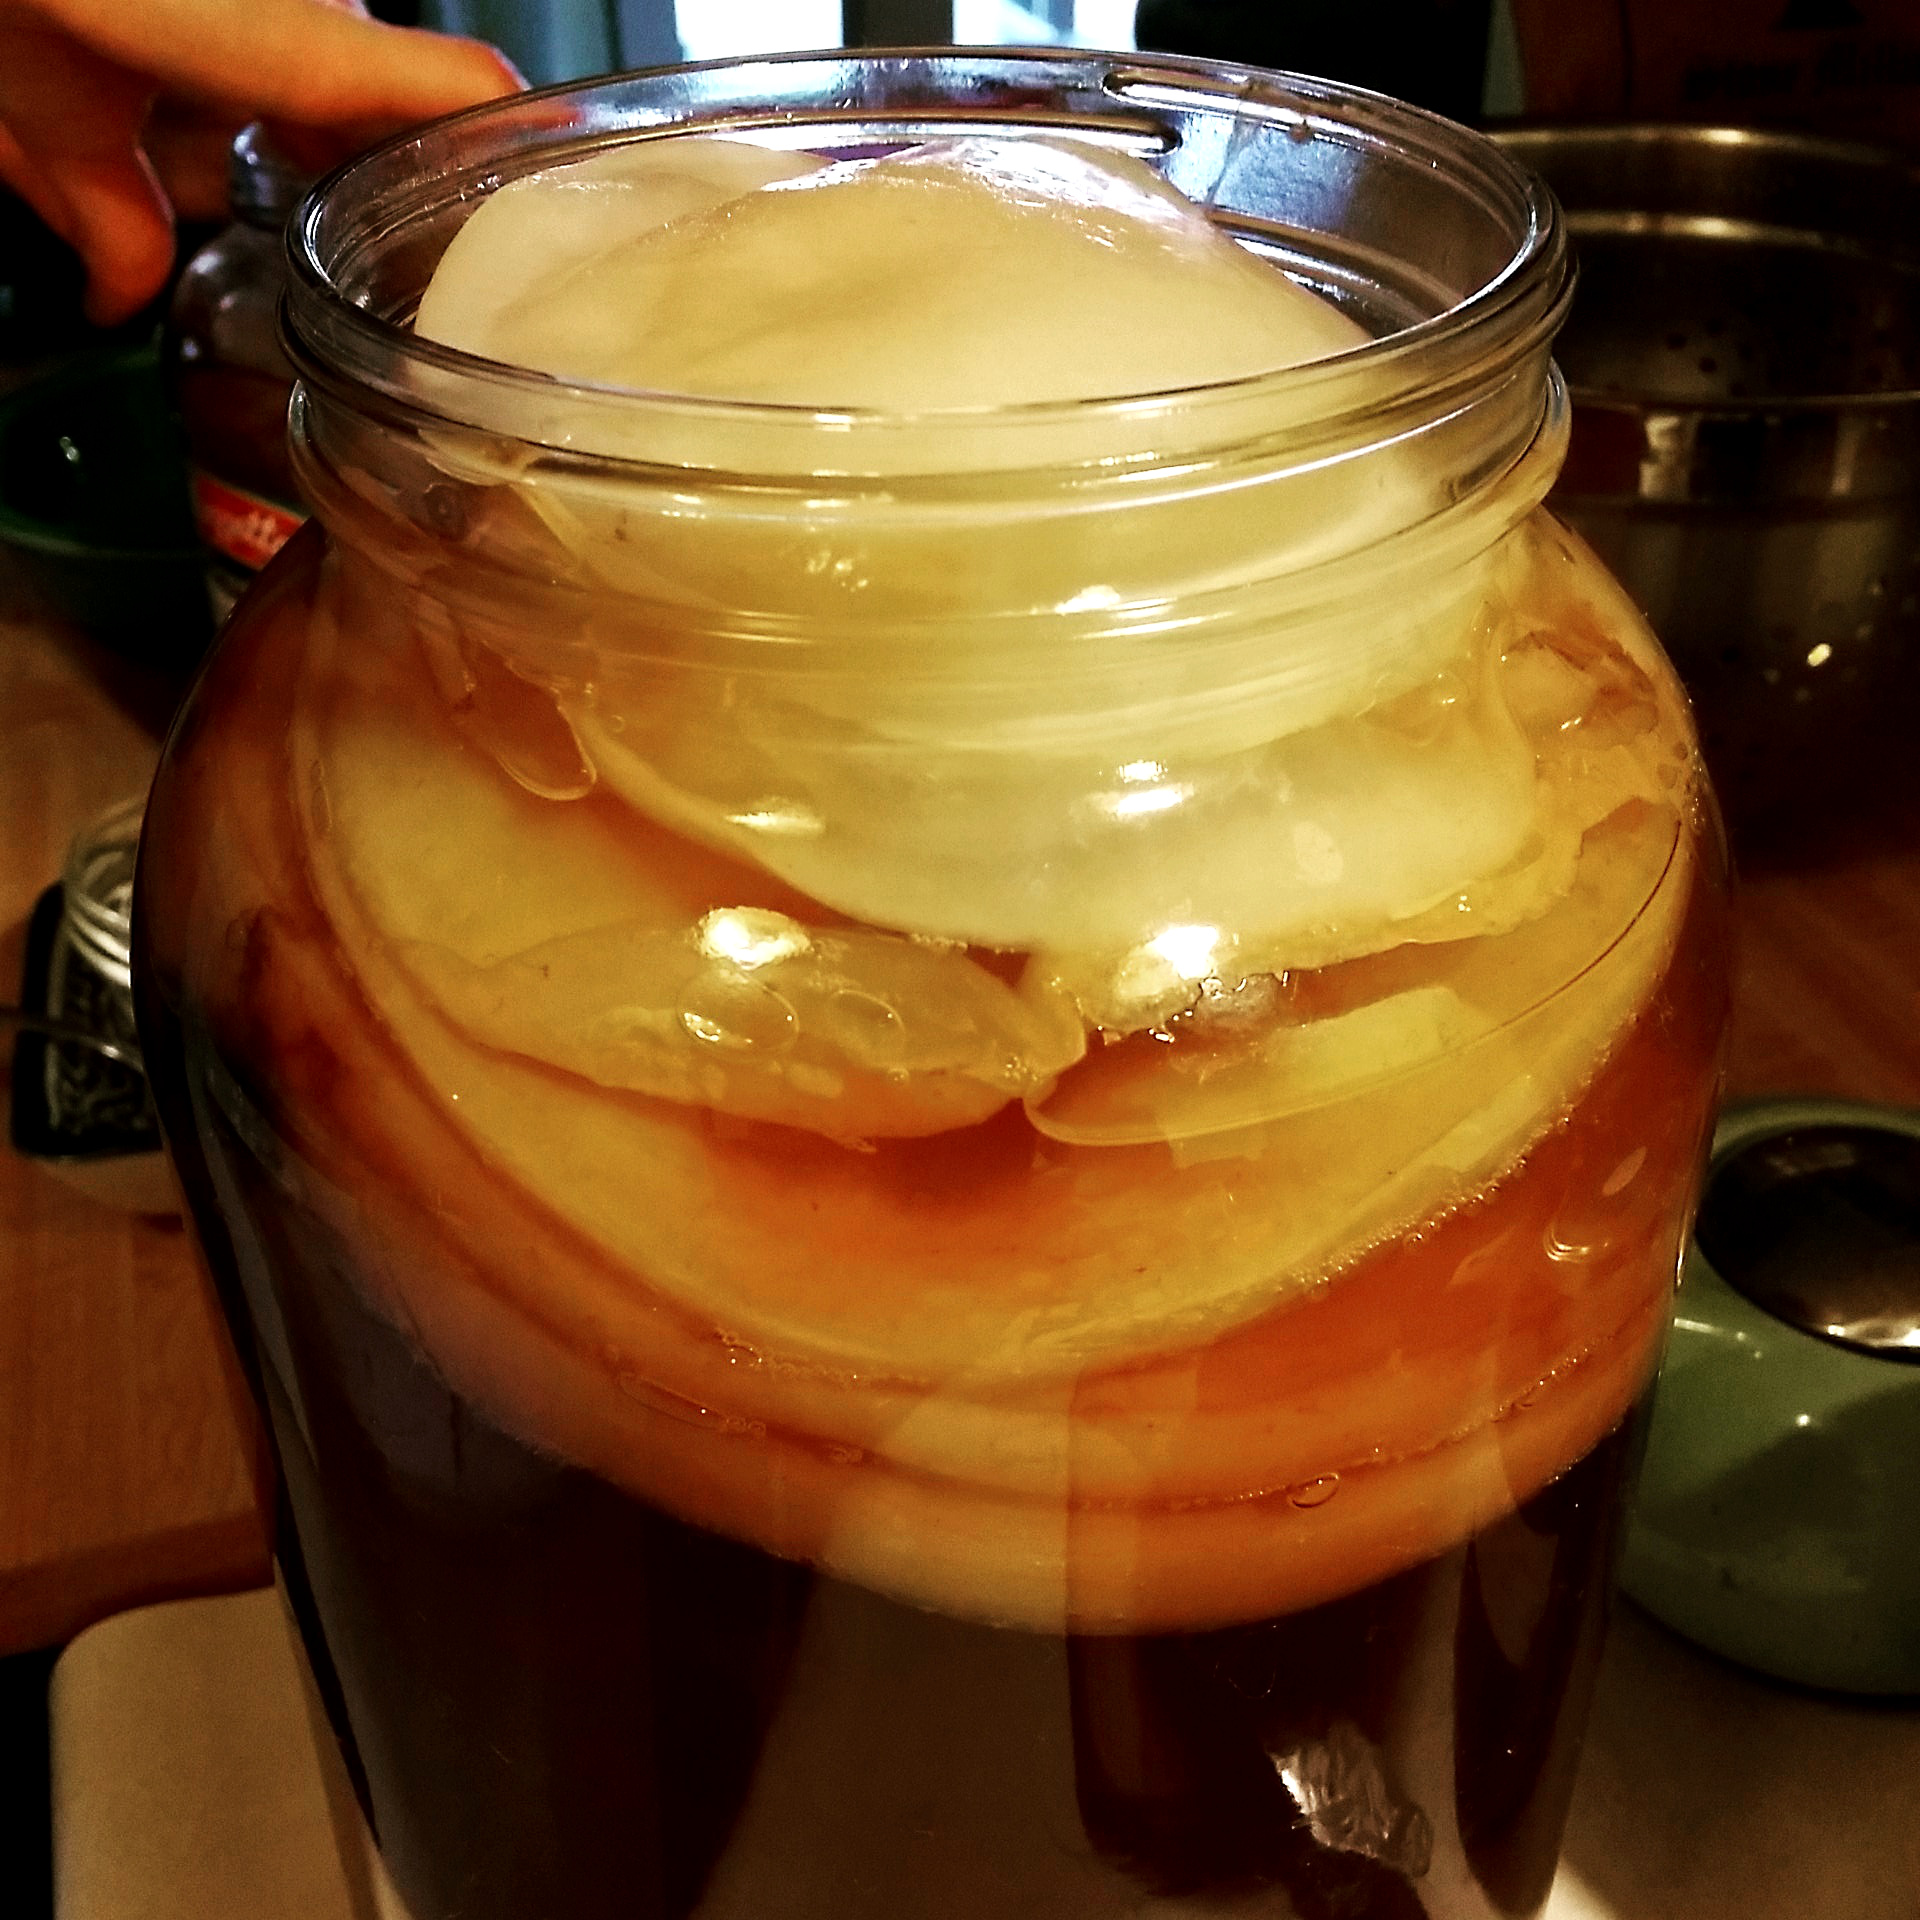 3 Things That Cause Mold on a Kombucha SCOBY – YEABUCHA